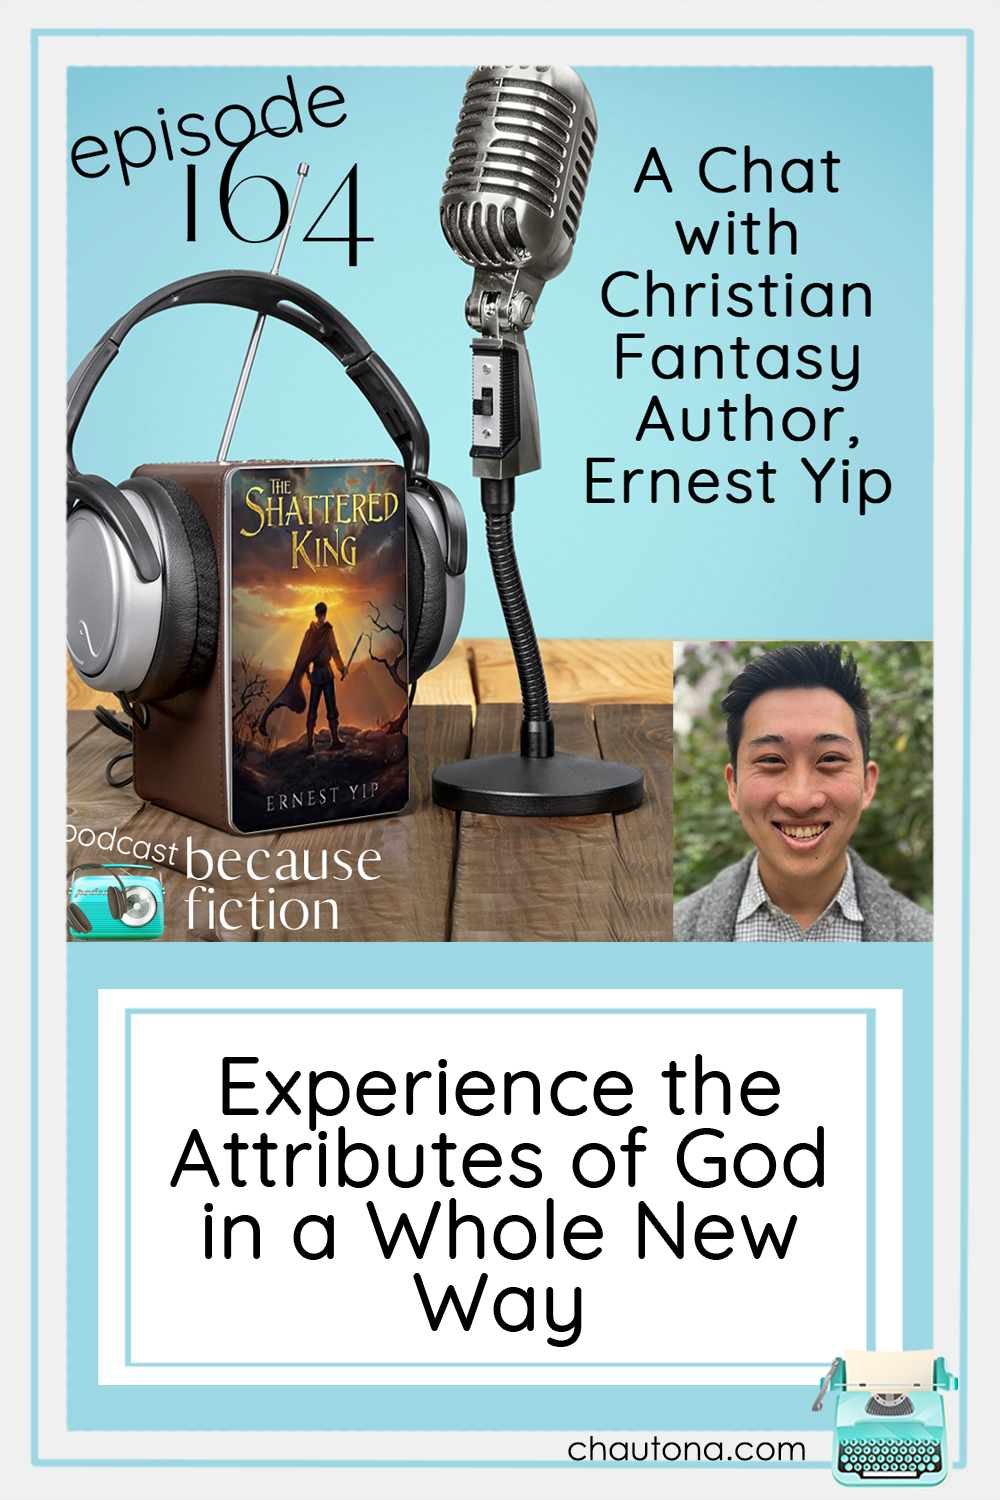 Ernest Yip spent his lockdown writing a fabulous allegorical fantasy novel, The Shattered King. Find out what attributes of God he showcased. via @chautonahavig